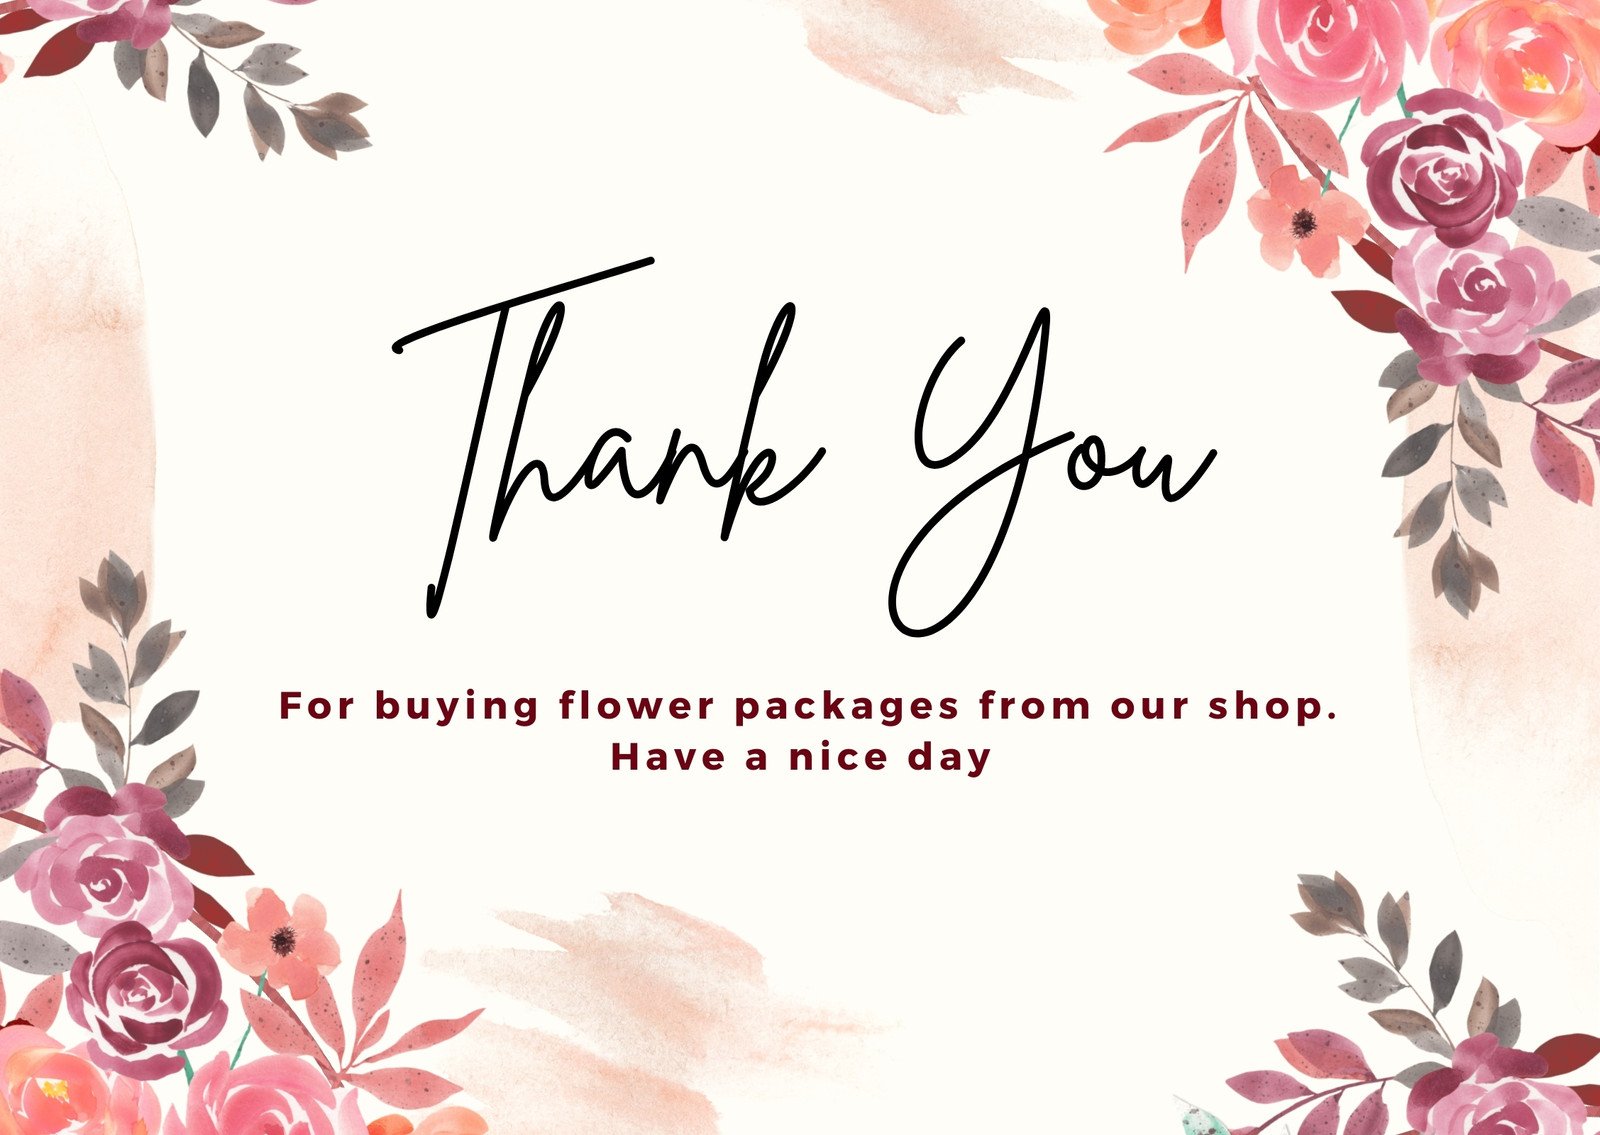 PRINTED Thank you Cards for Small Business Pink Flower Thank You Card 60 count